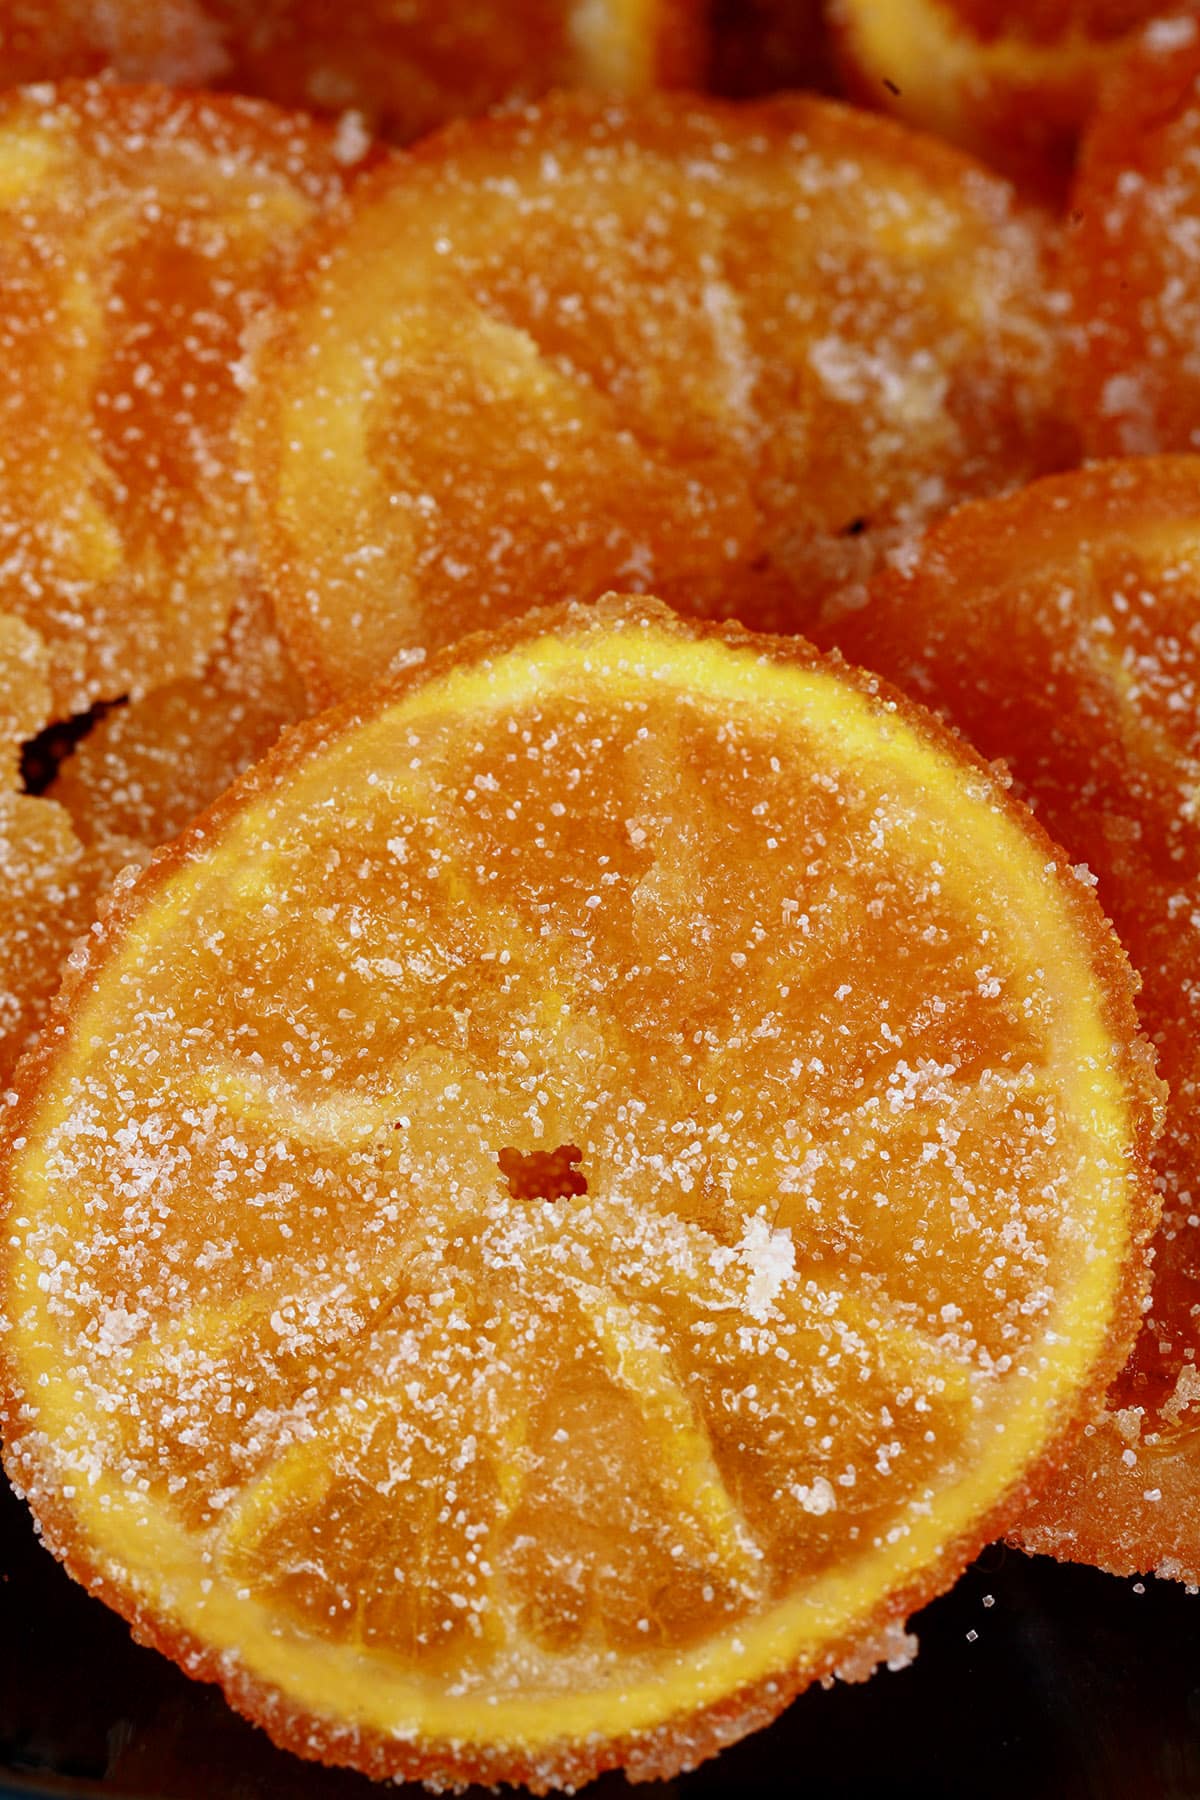 A close up photo of candied orange slices.